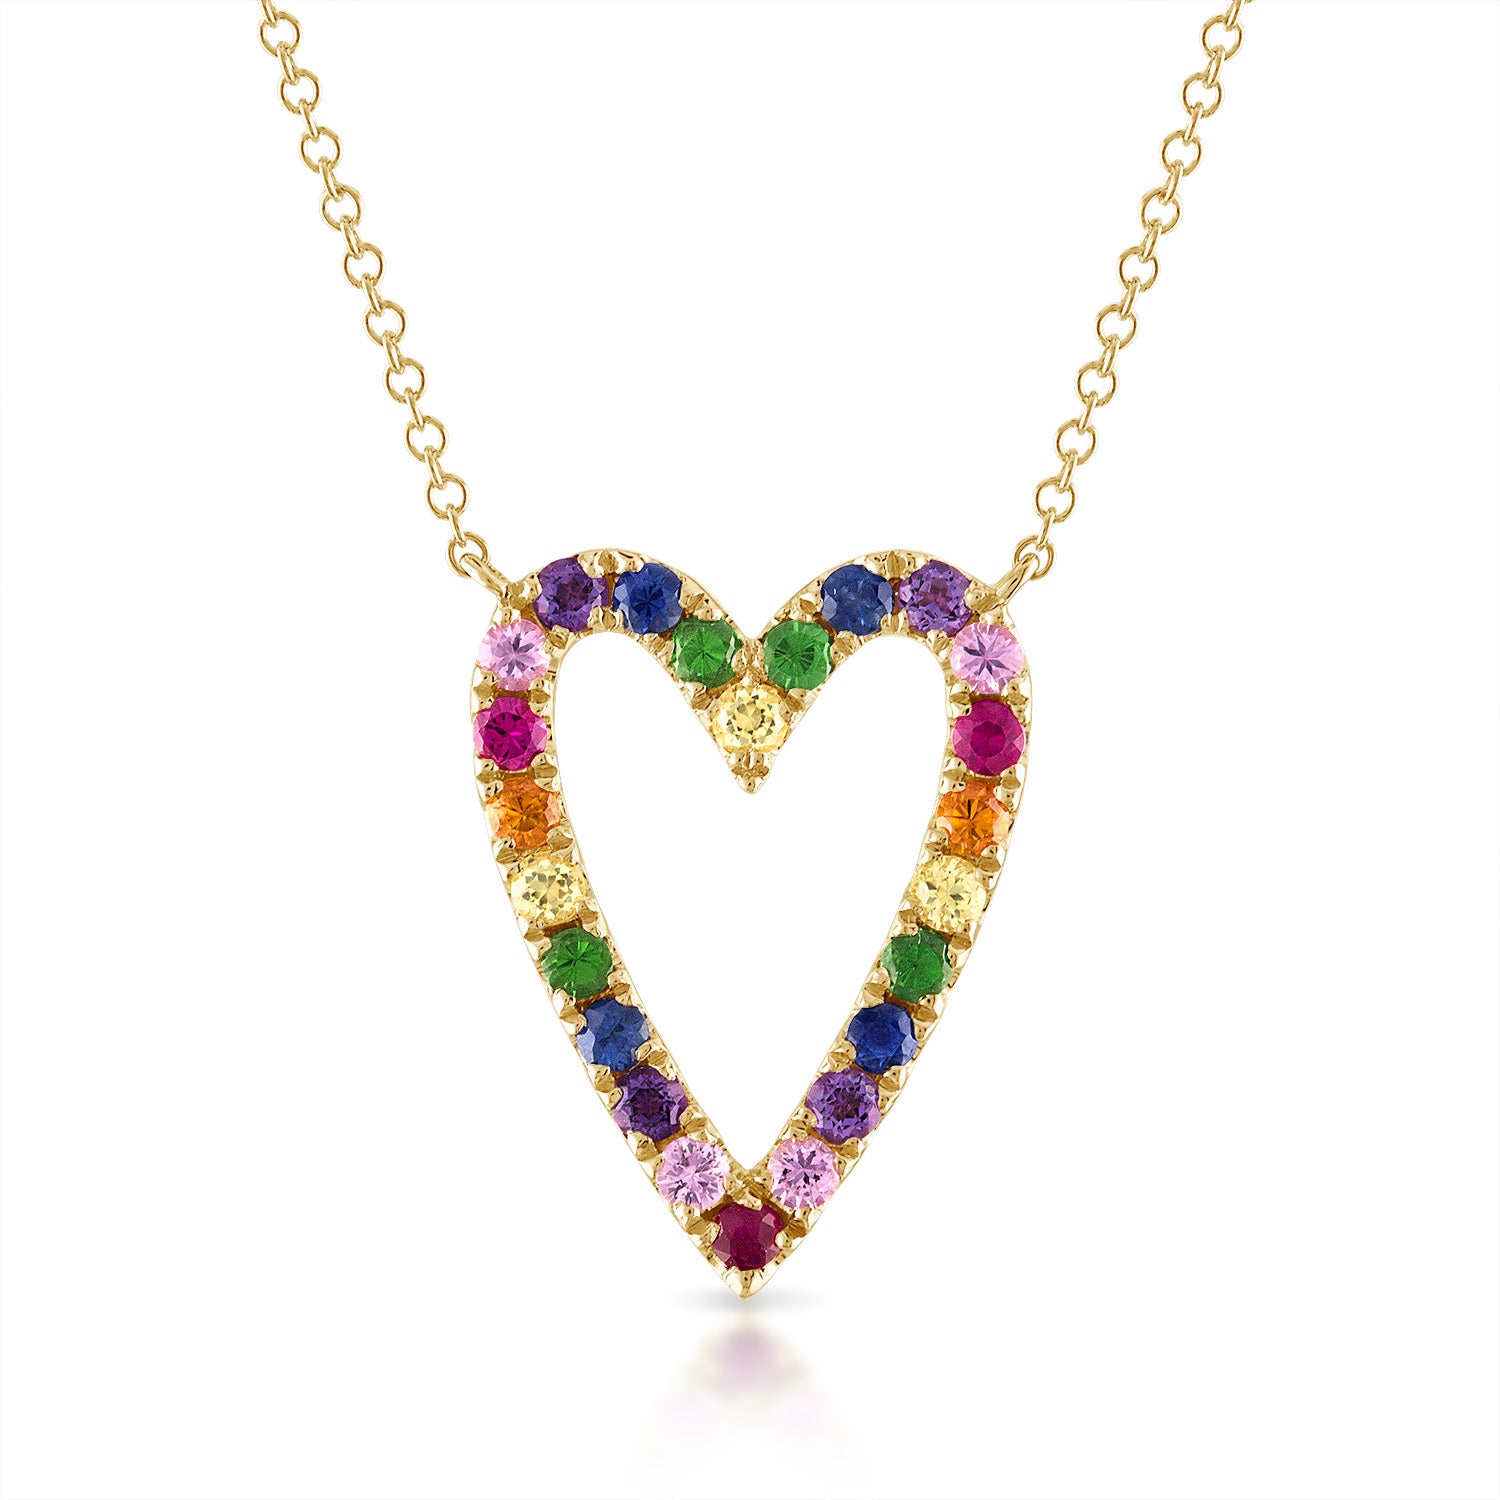 Multicolored Pave Heart Shaped Outline Necklace